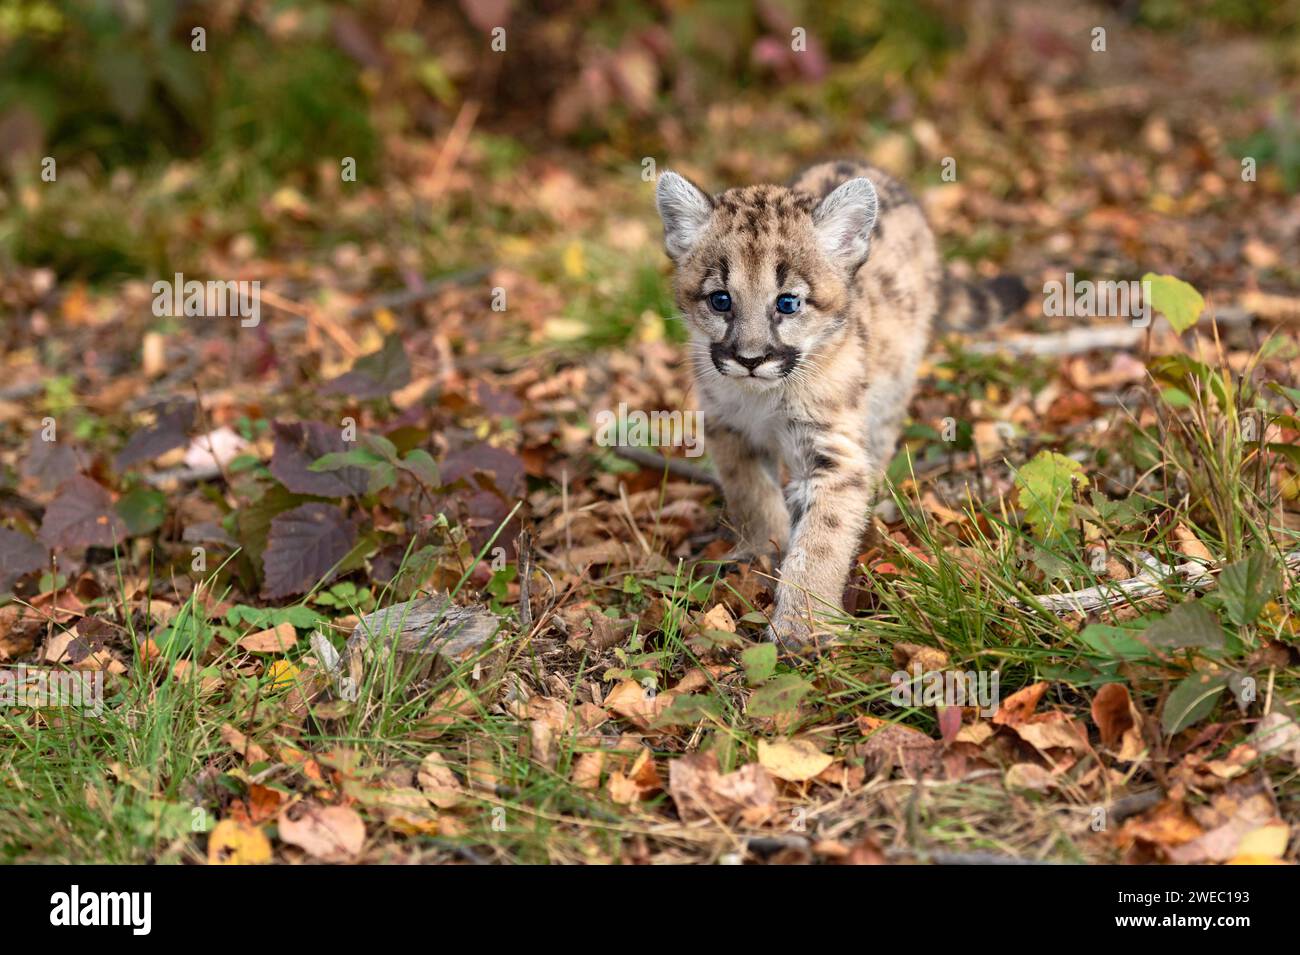 Cougar Kitten (Puma concolor) Walks Forward Looking Out Autumn - captive animal Stock Photo